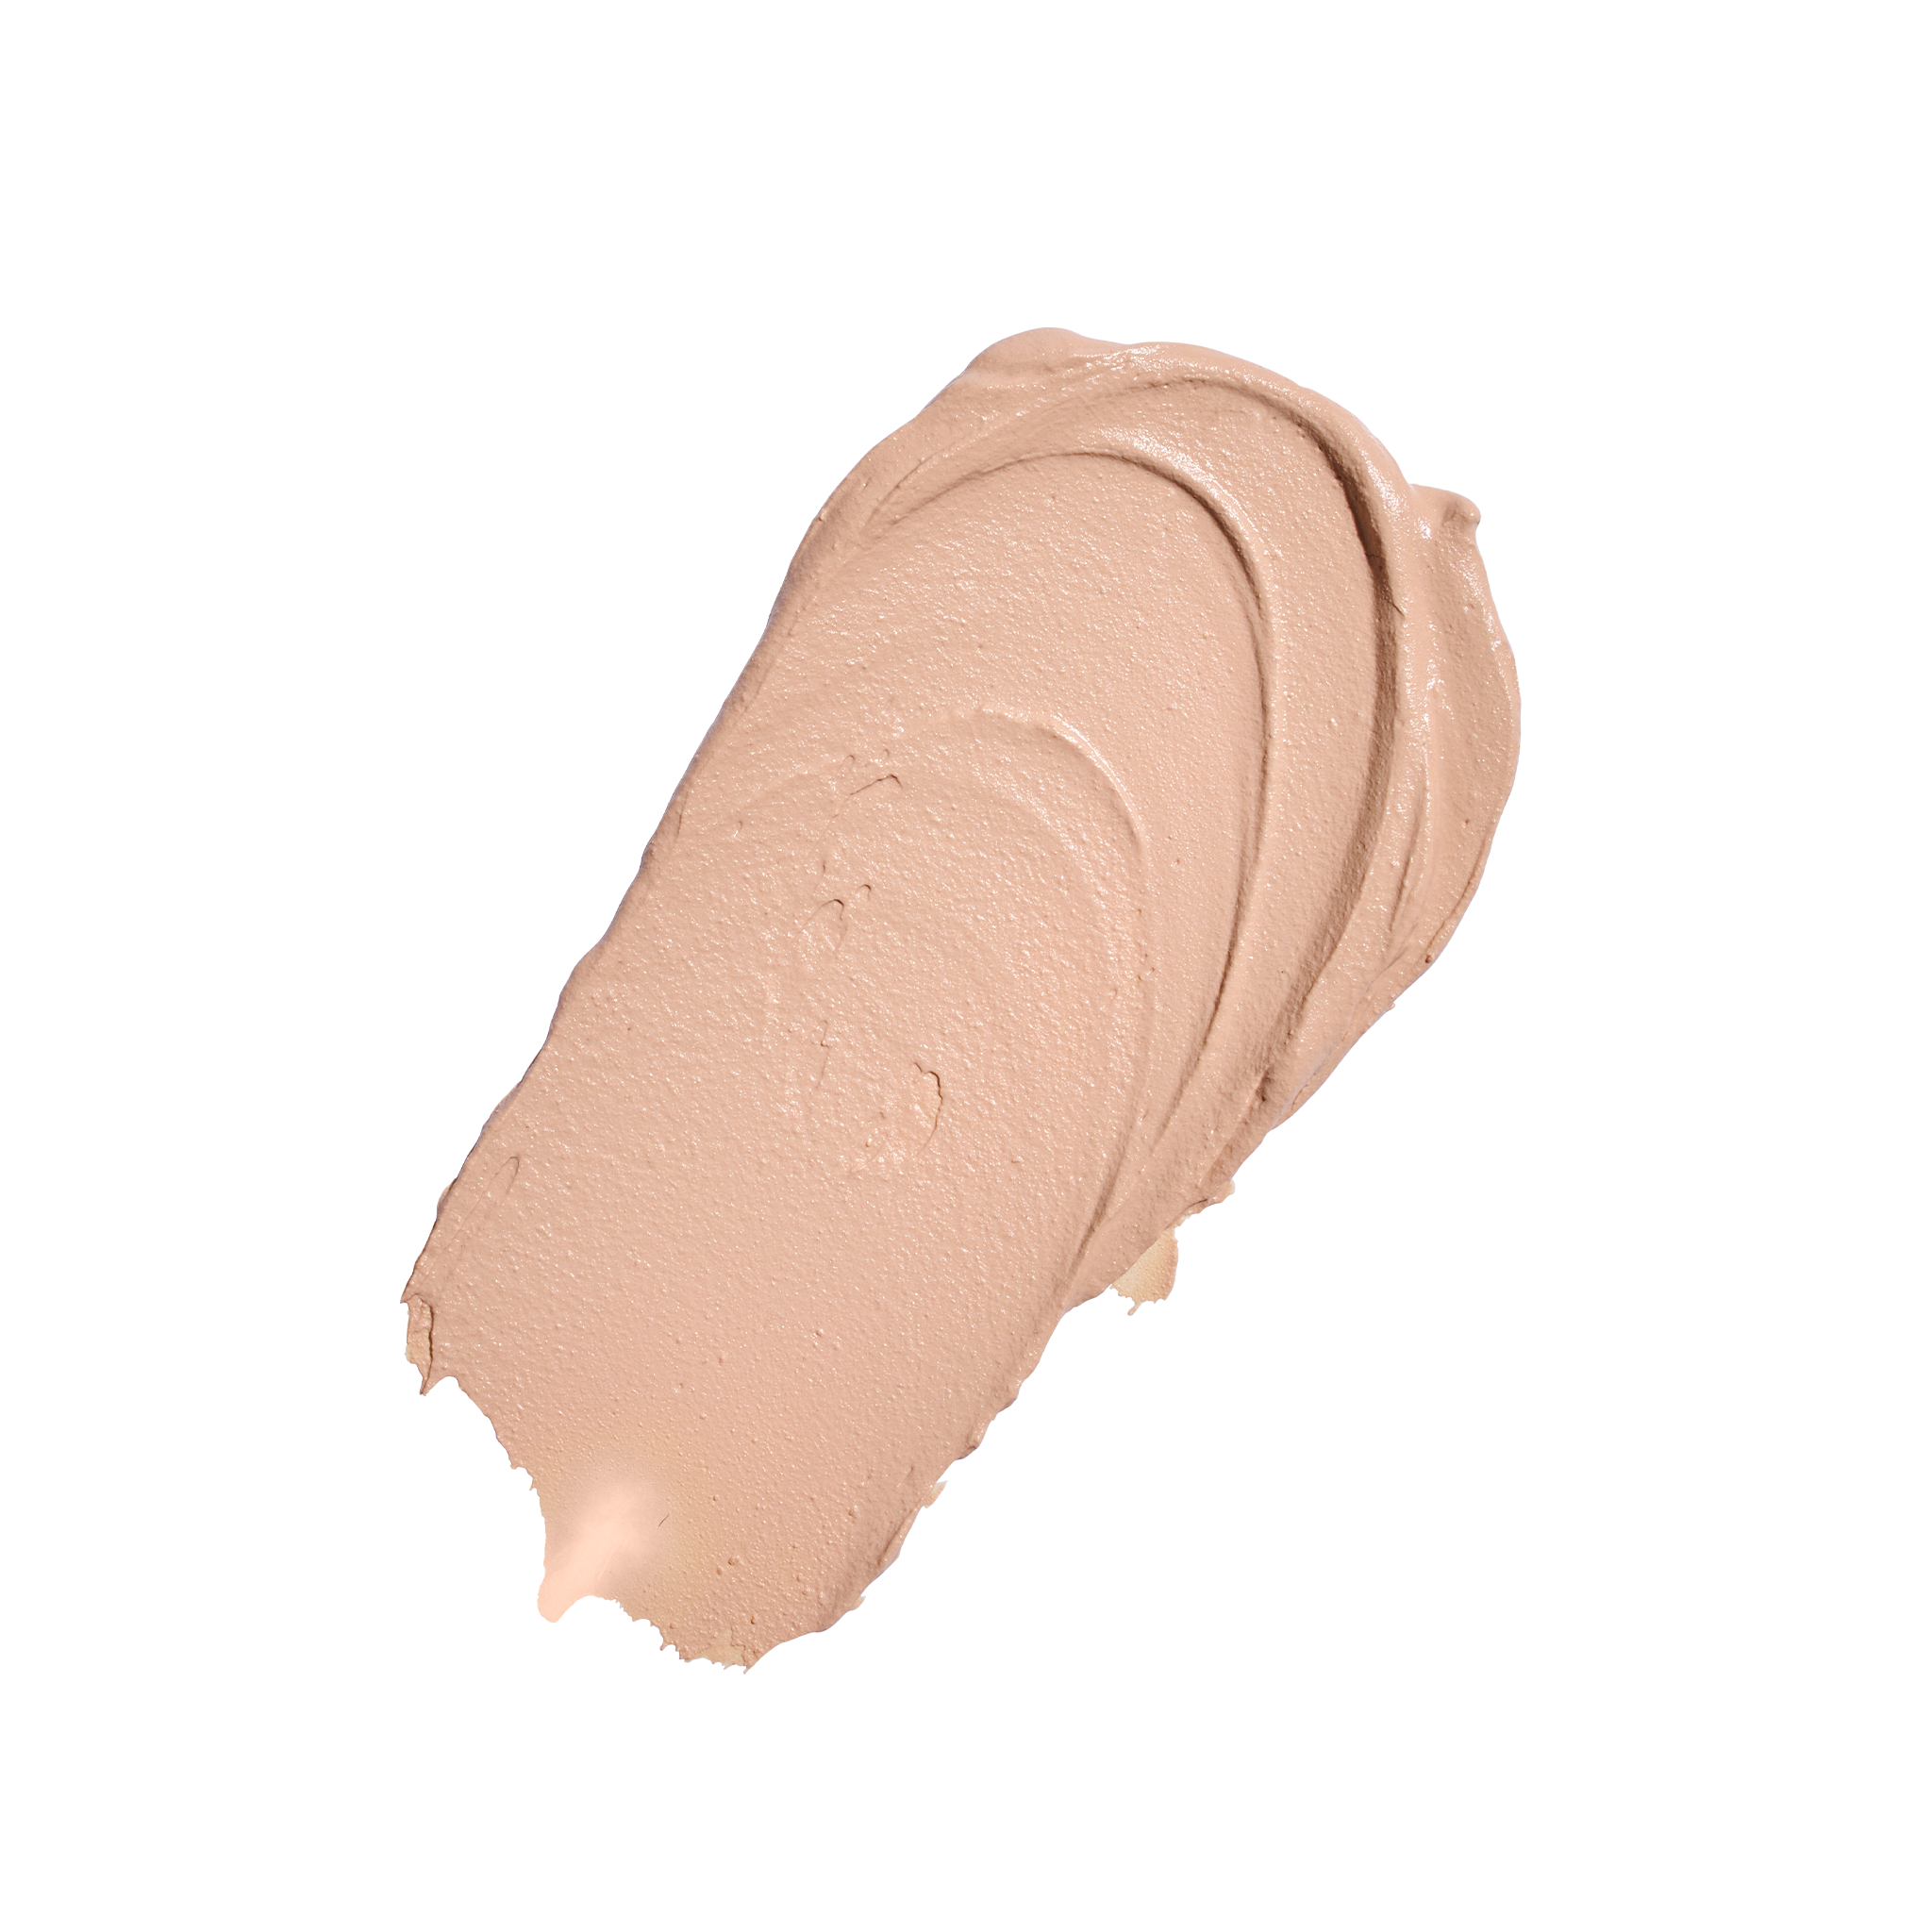 Tint du Soleil™ Whipped Mineral Foundation SPF 30 swatch || Light